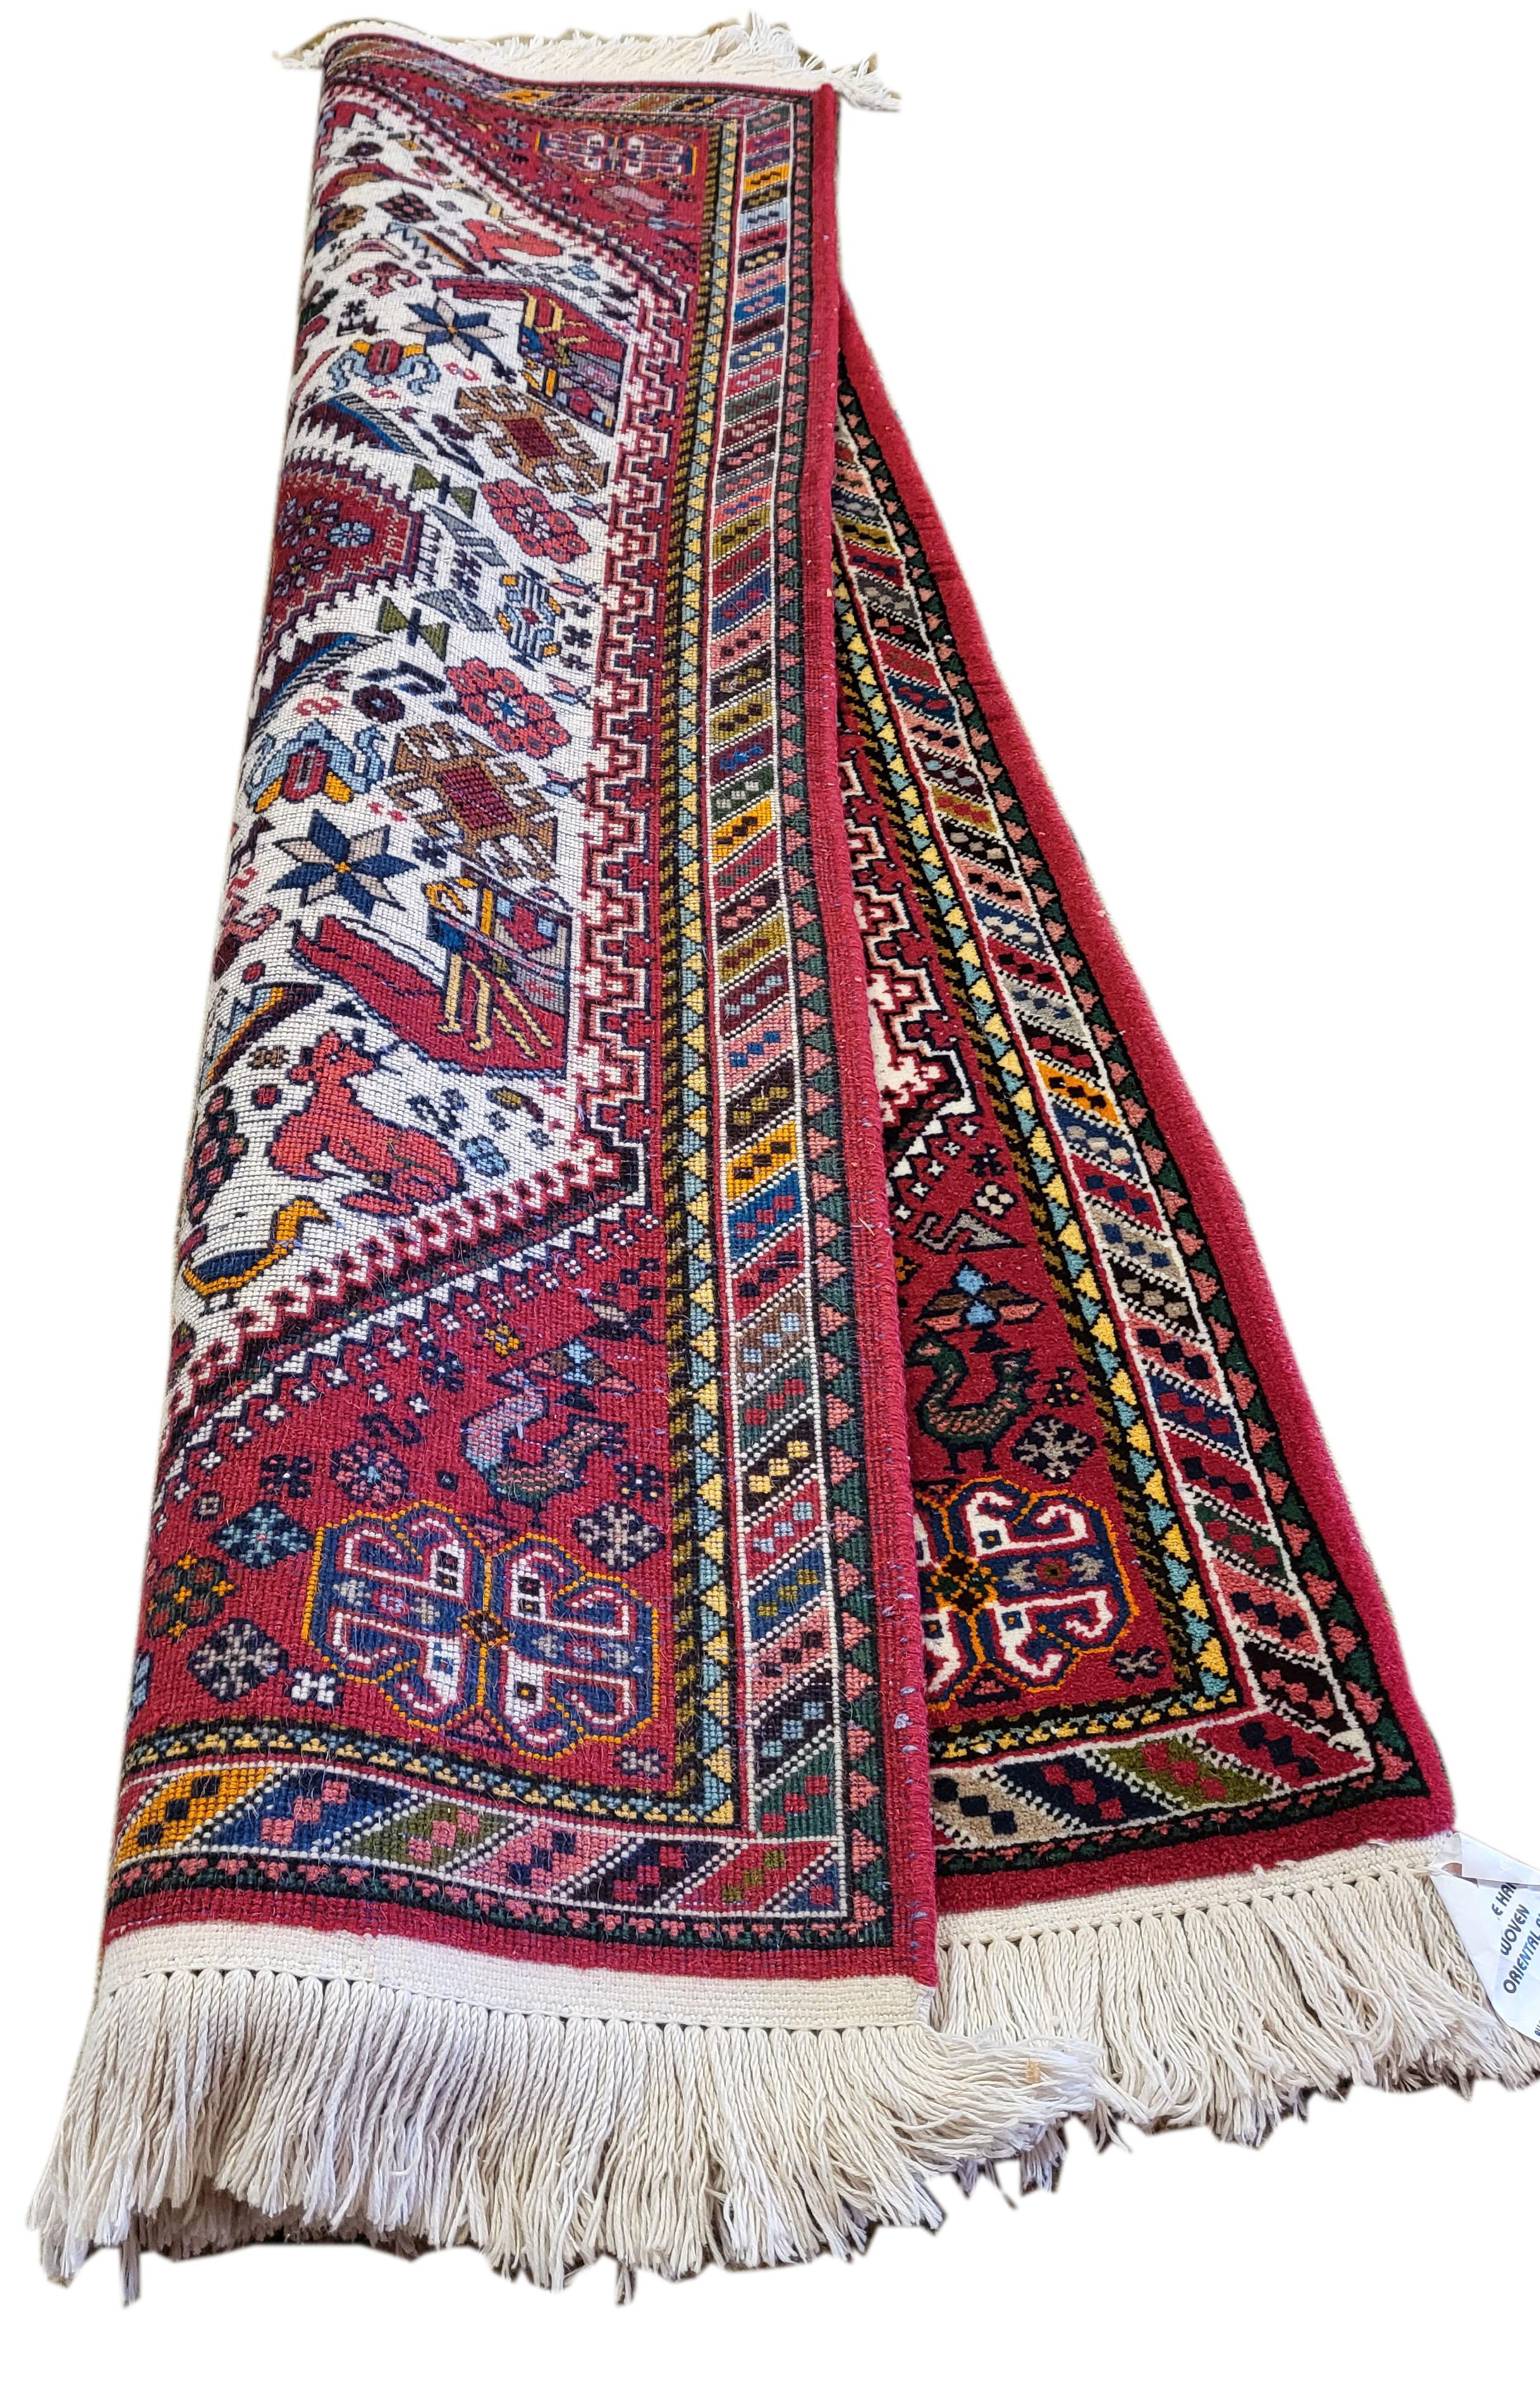 Absolutely pristine 50's Persian Abadeh entry rug. The Abadeh area has been producing incredible quality hand woven rugs for literally thousands of years. The craftsmanship and deign reflect Abaeh's rich heritage. Heavy in playful motifs and bright